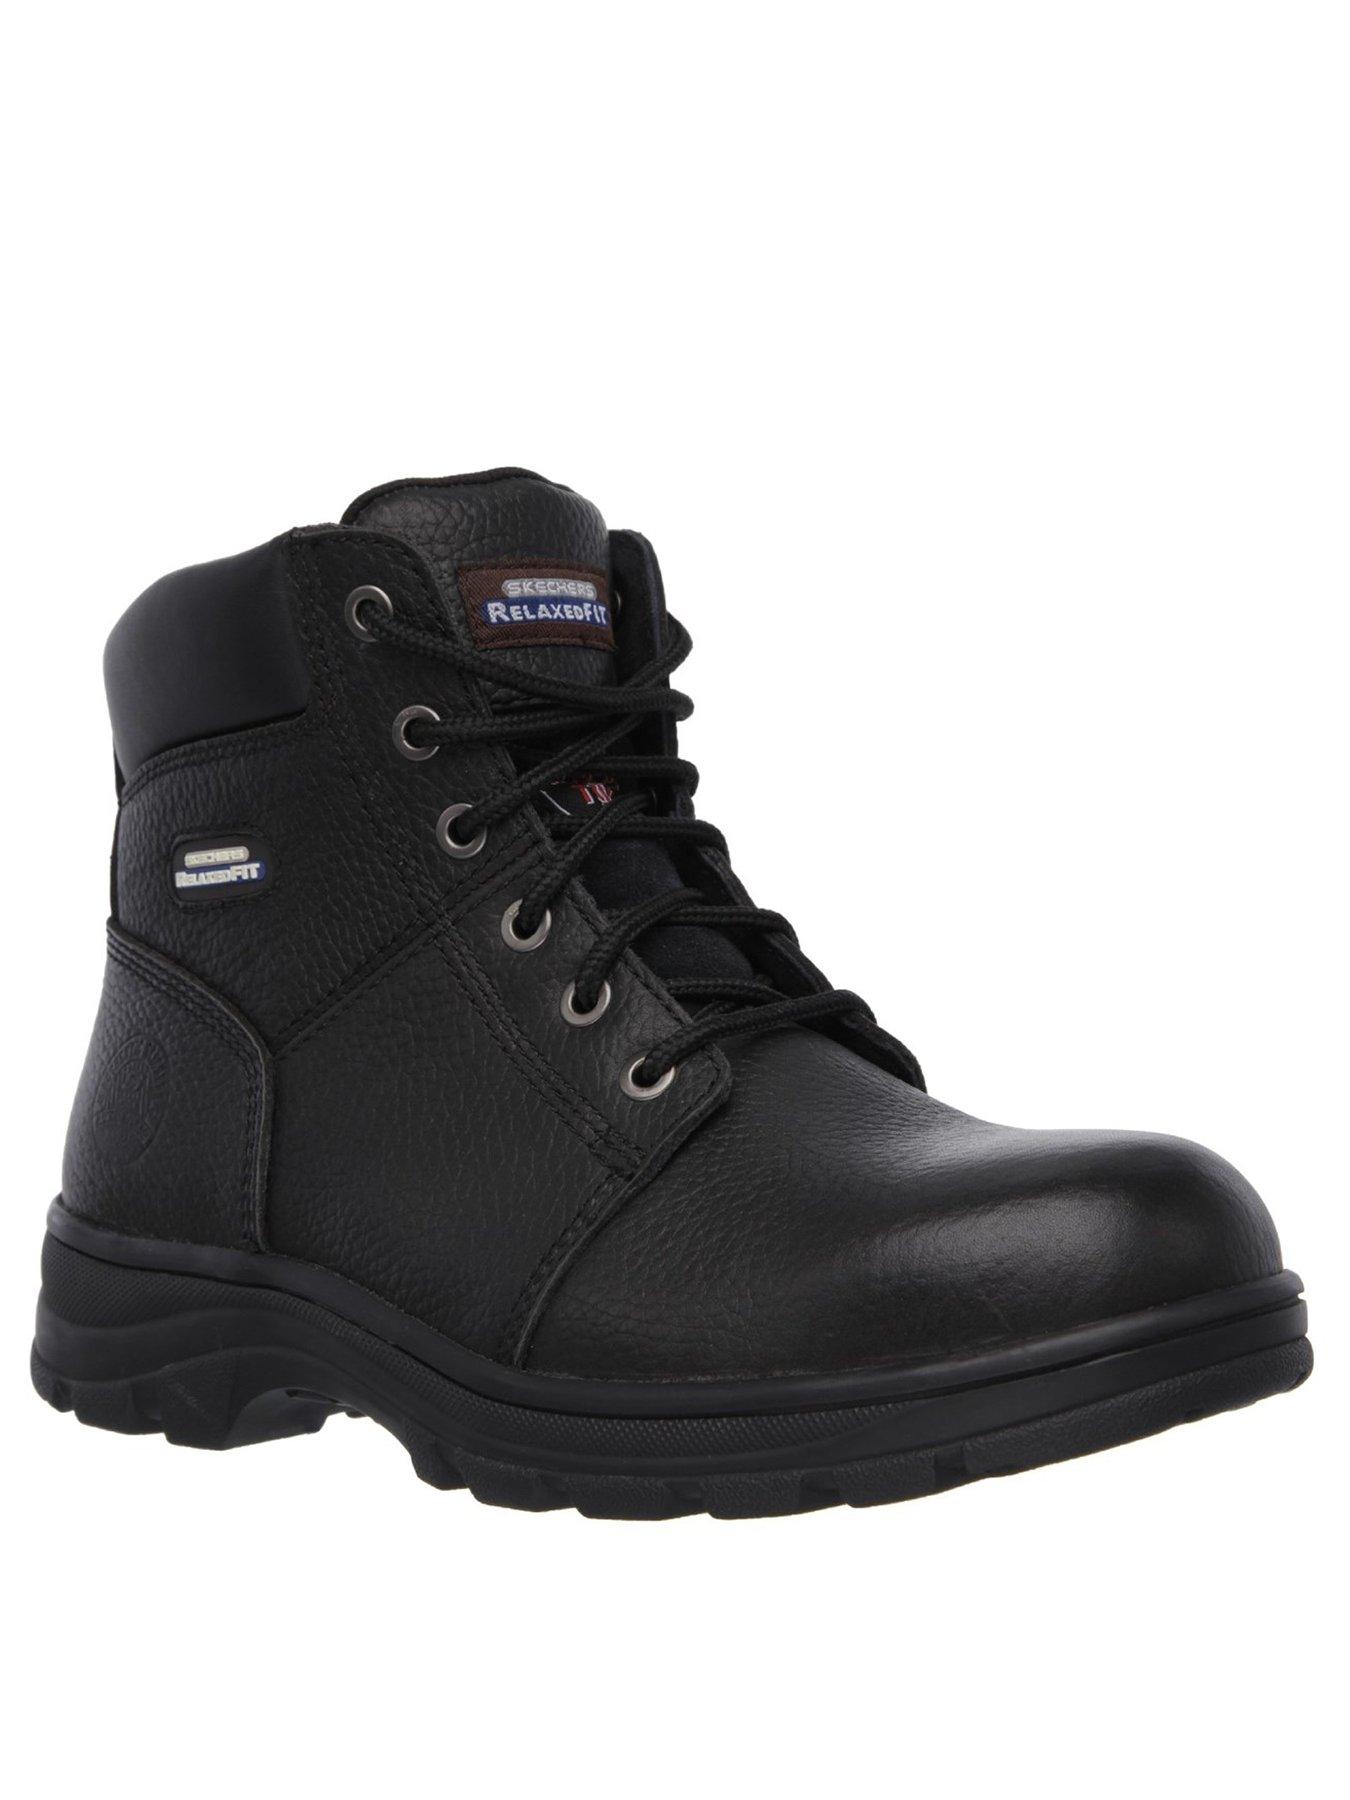 Compare Lowest Prices Goodyear Safety Boots Composite Toe S1P ...